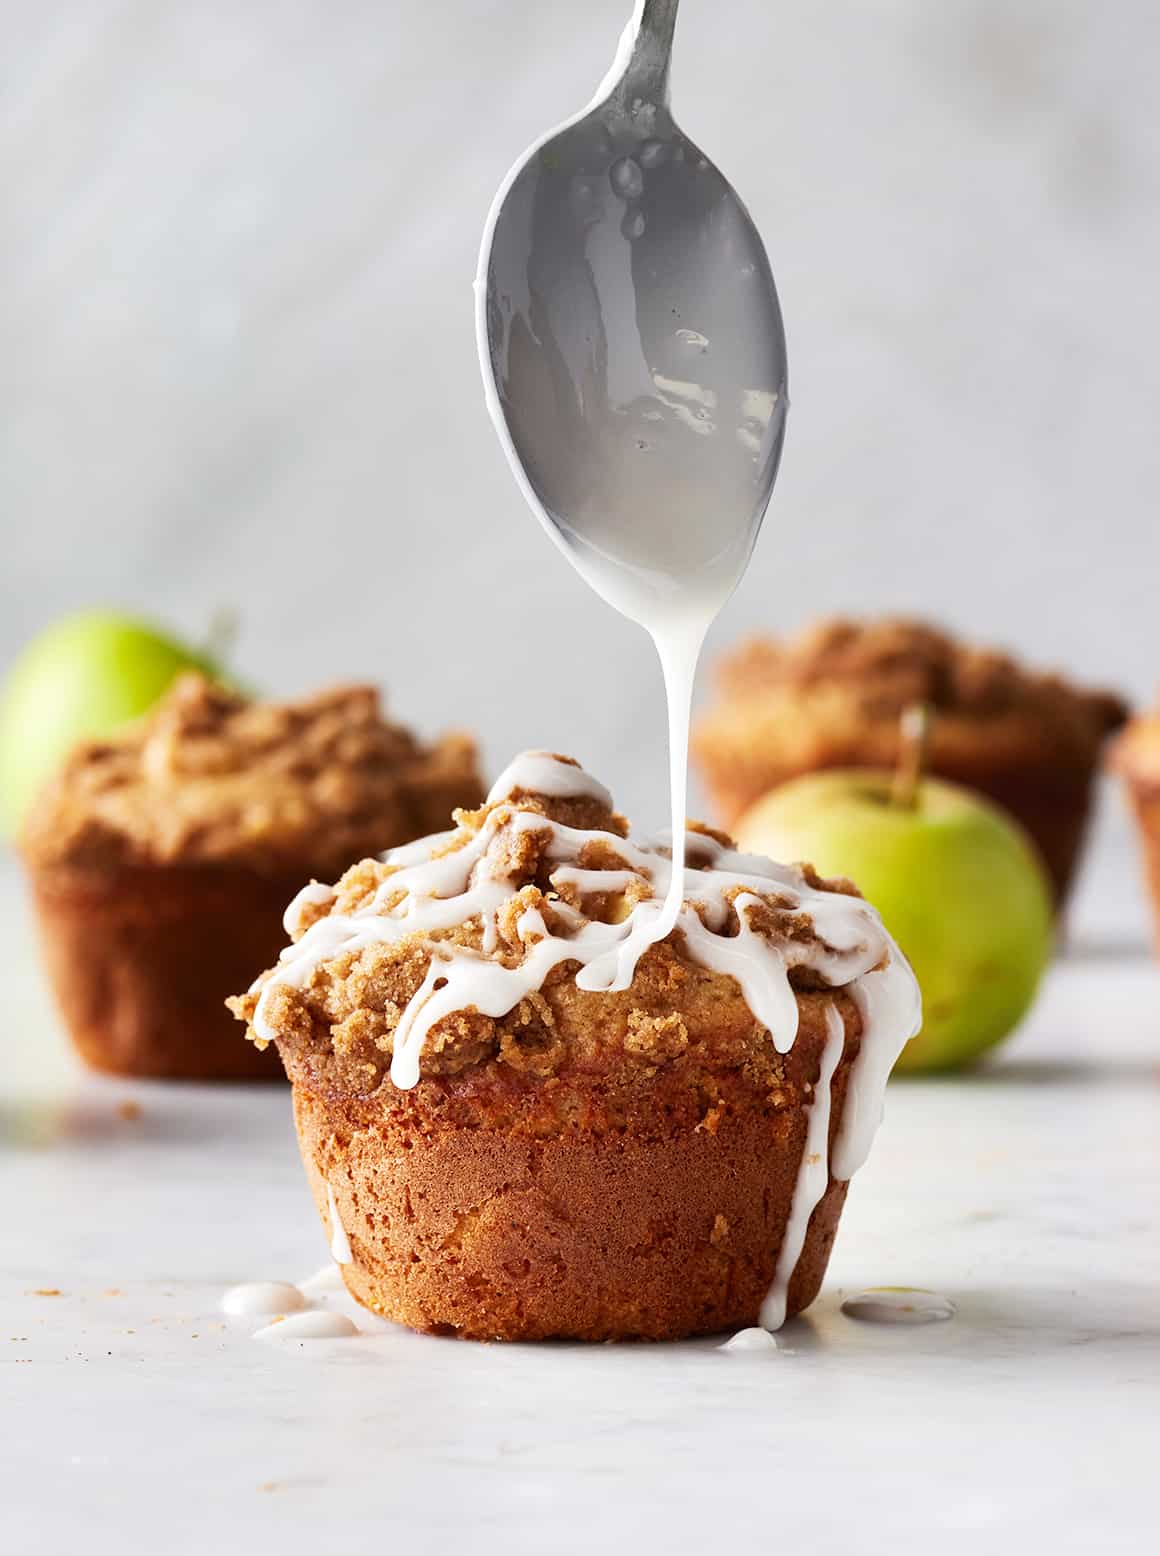 Apple muffins with cinnamon crumble topping and vanilla glaze